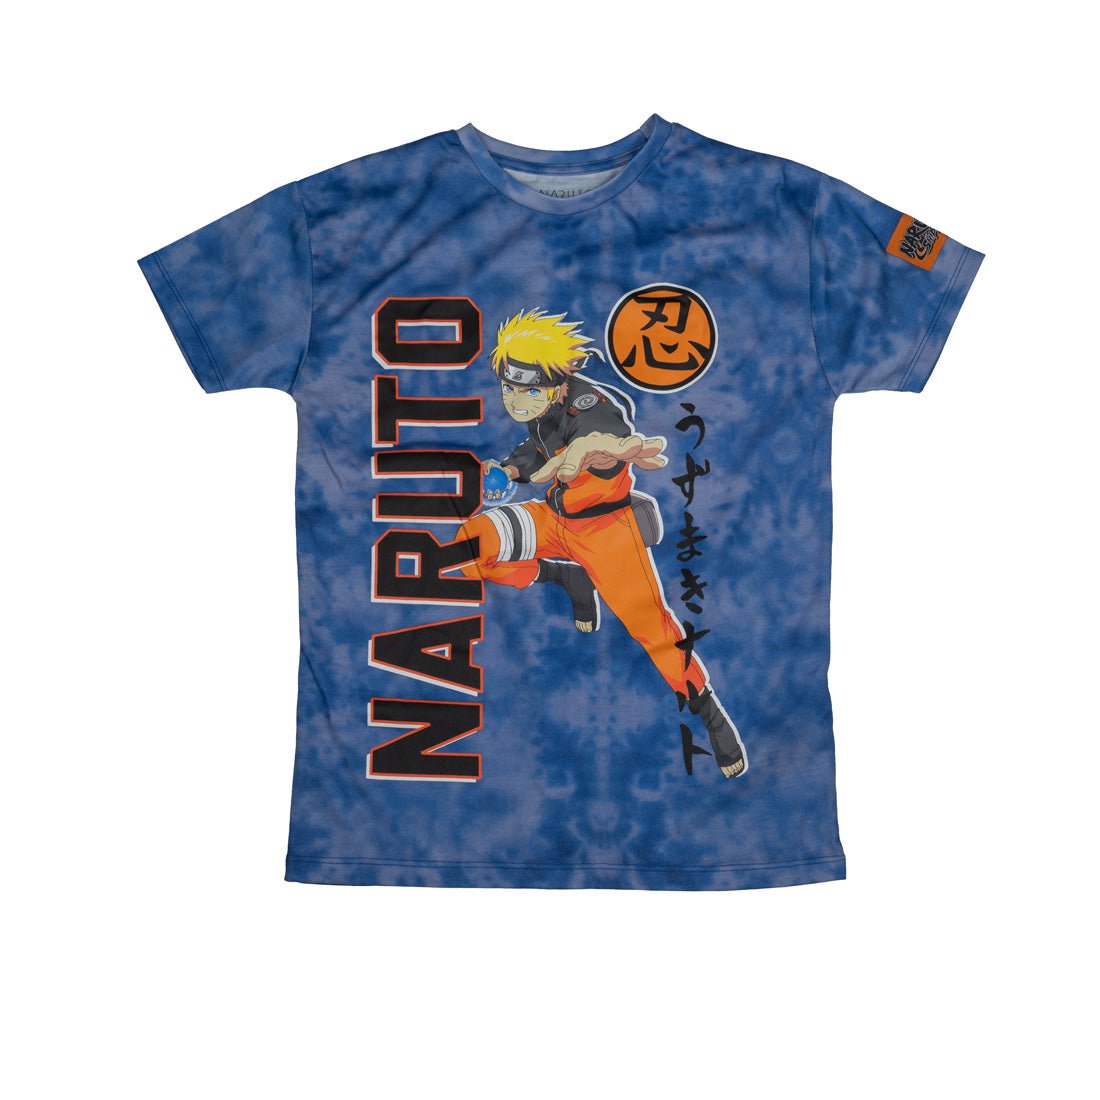 Naruto Brand New T-shirt For Boys - mymadstore.com